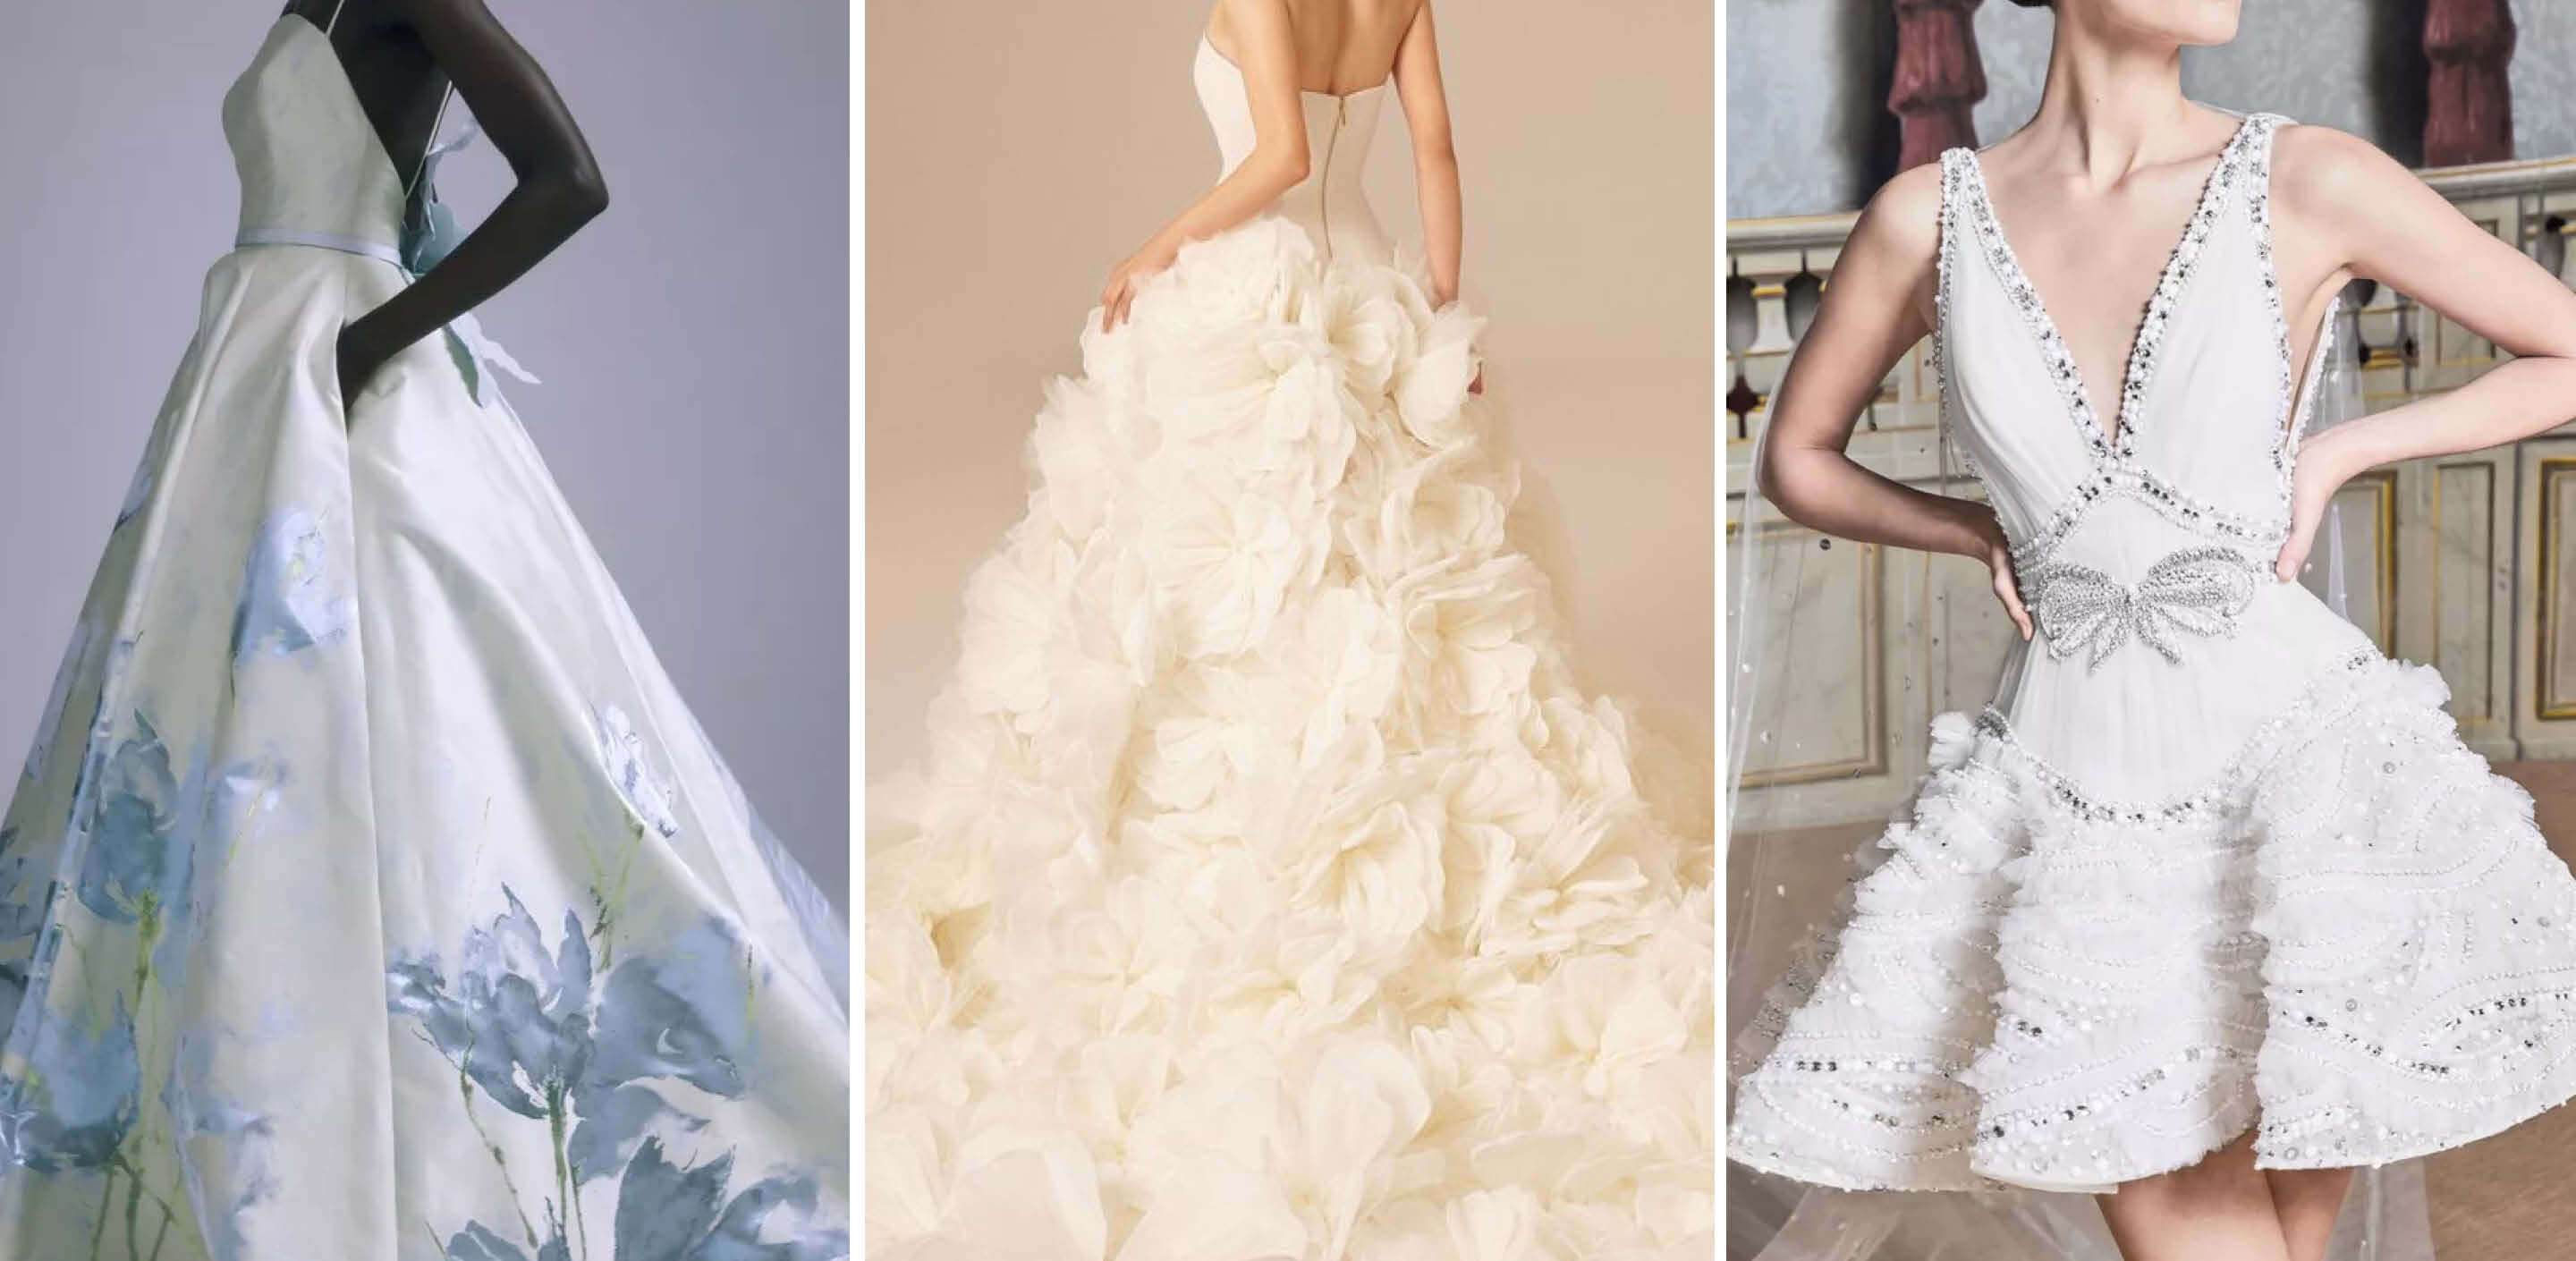 5 Trends We Loved at New York Bridal Fashion Week - New Jersey Bride